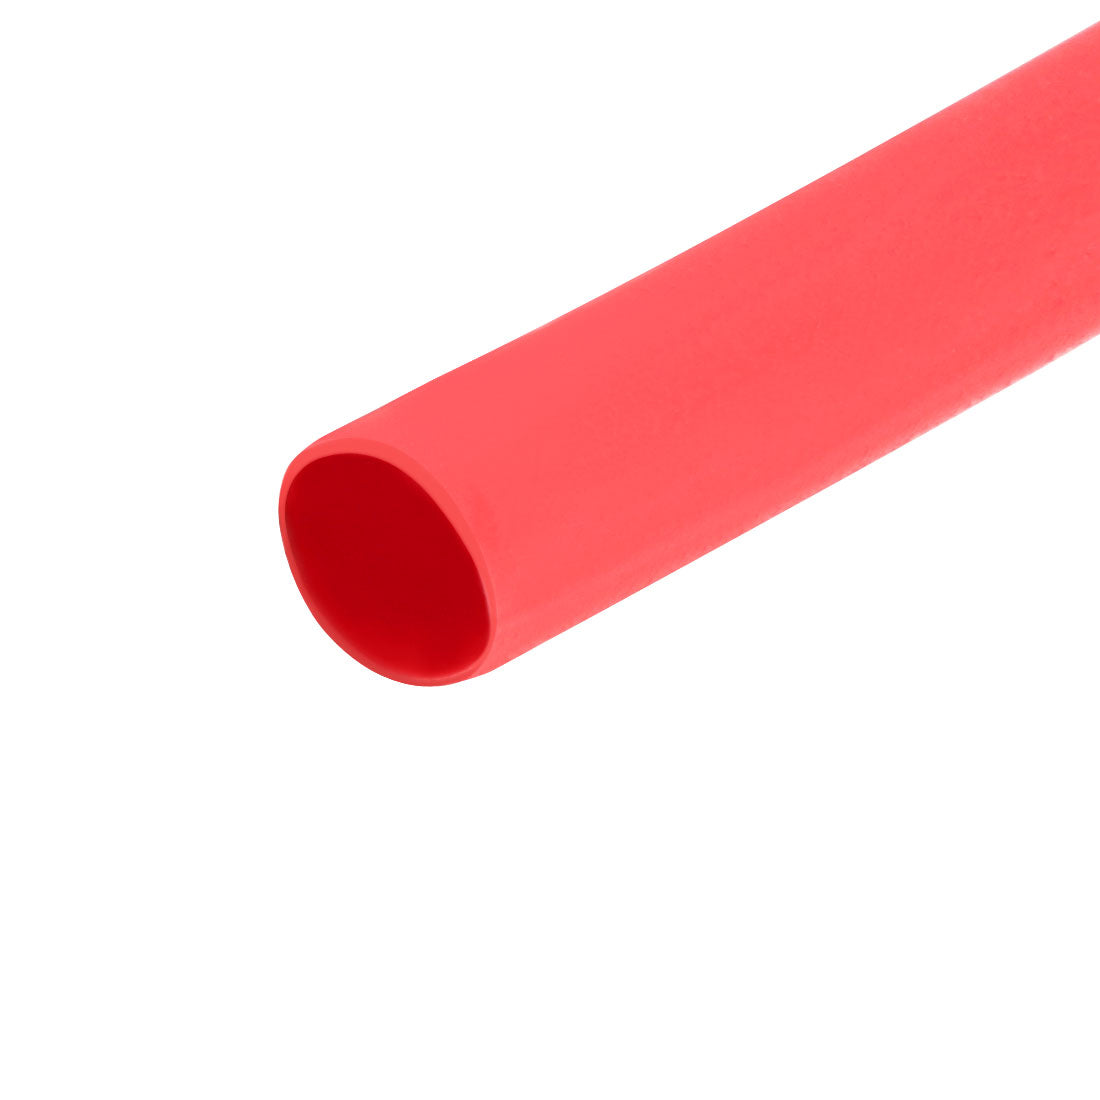 uxcell Uxcell Heat Shrink Tube 2:1 Electrical Insulation Tube Wire Cable Tubing Sleeving Wrap Red 2mm Diameter 1m Long